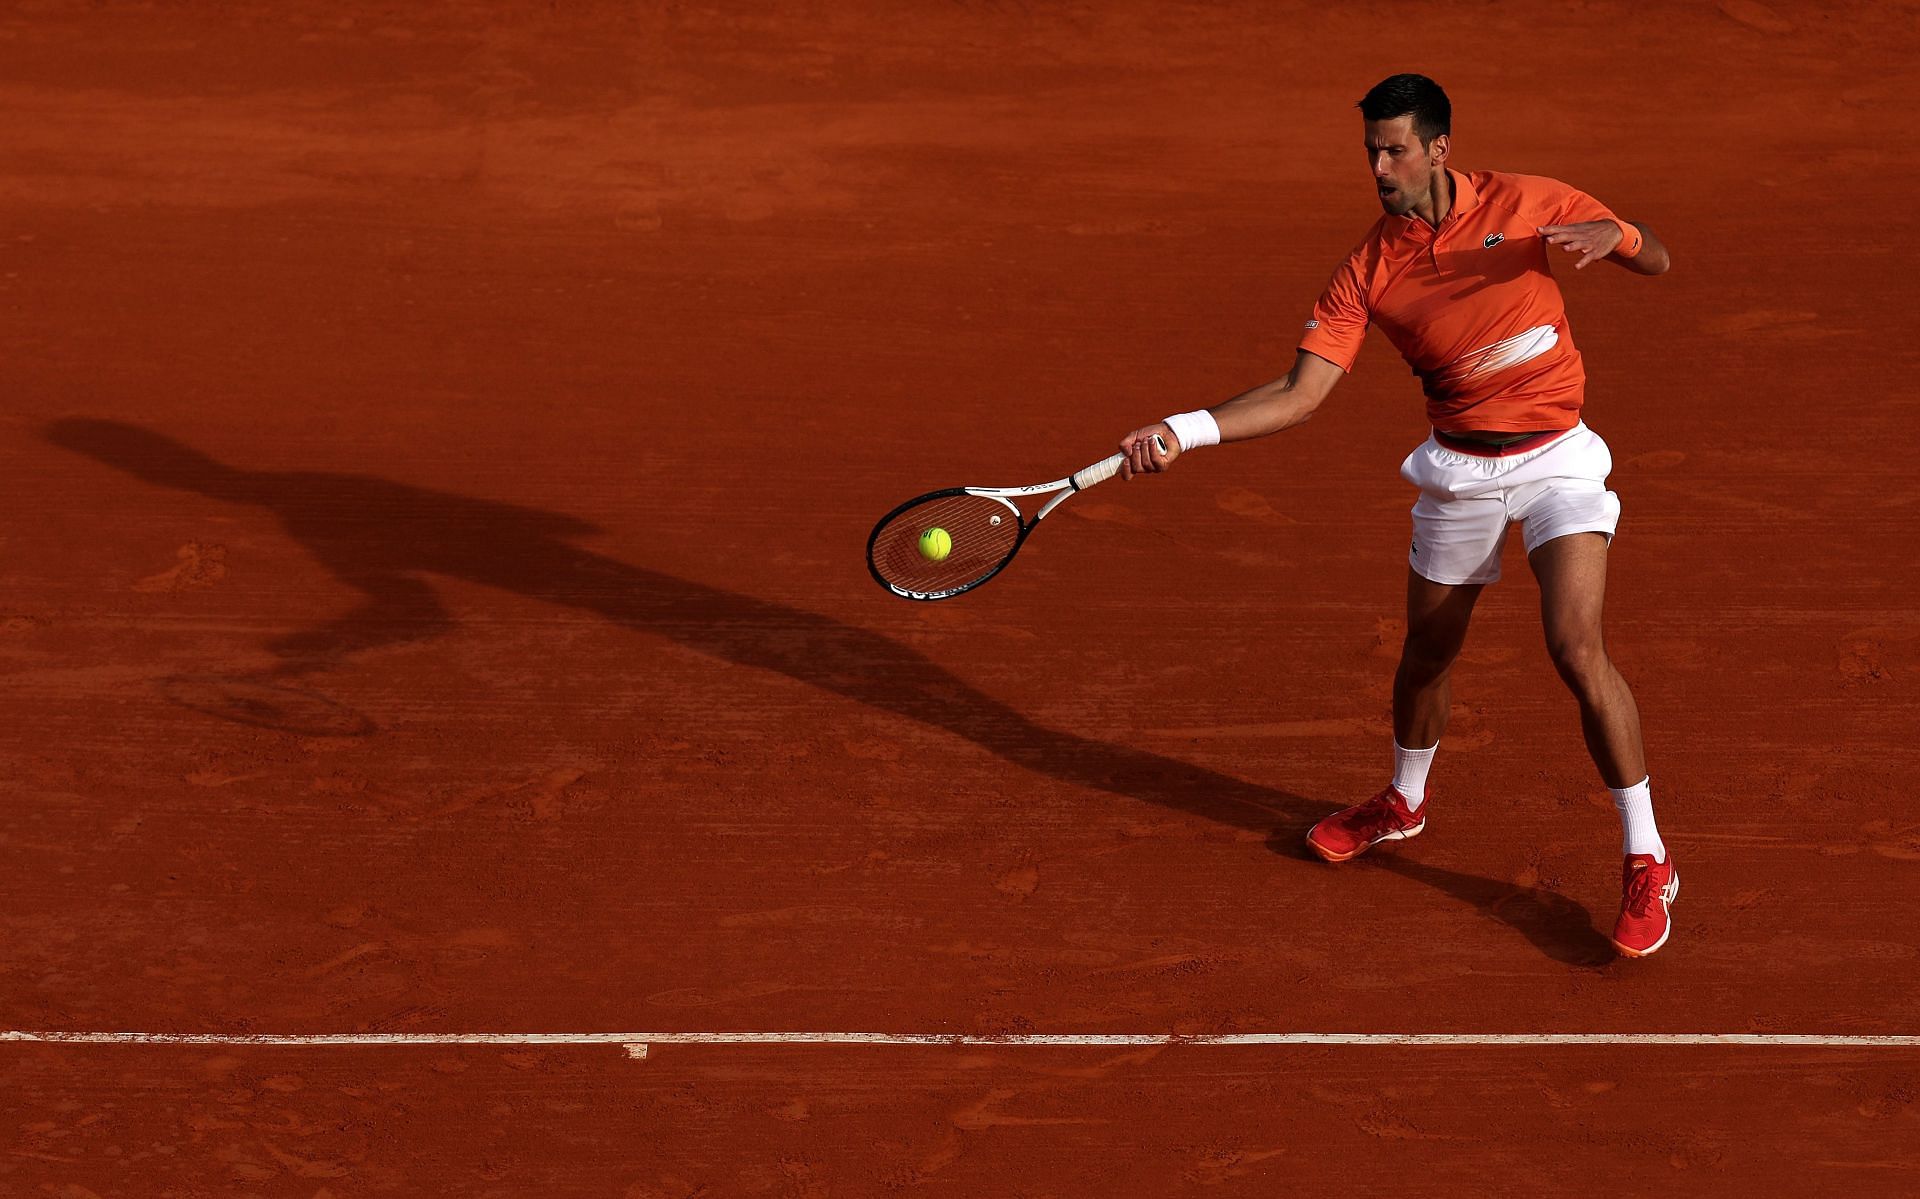 Novak Djokovic will compete in the Serbia Open as the top seed